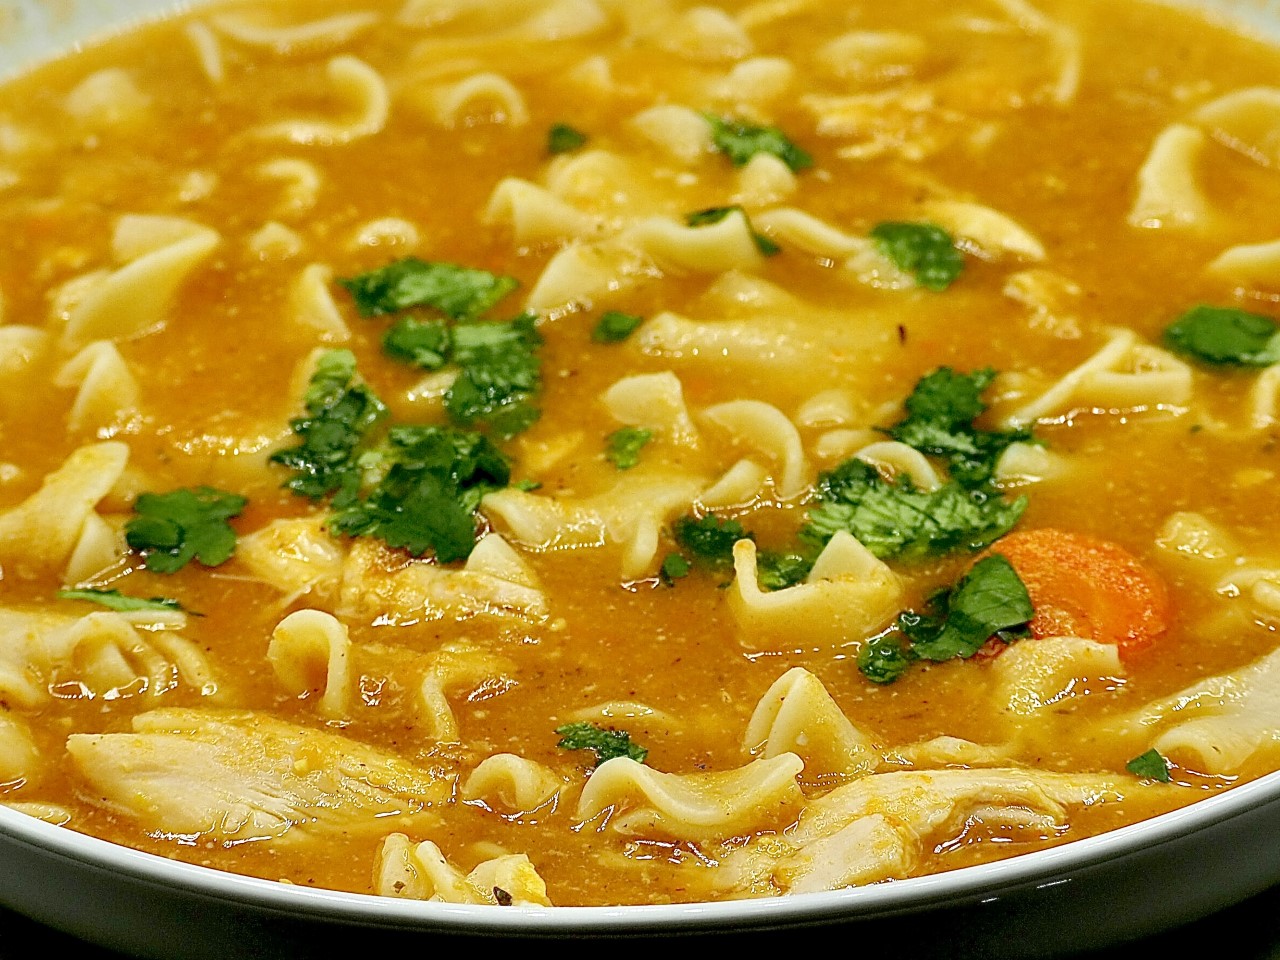 Deluxe Chicken Noodle Soup with Roasted Garlic